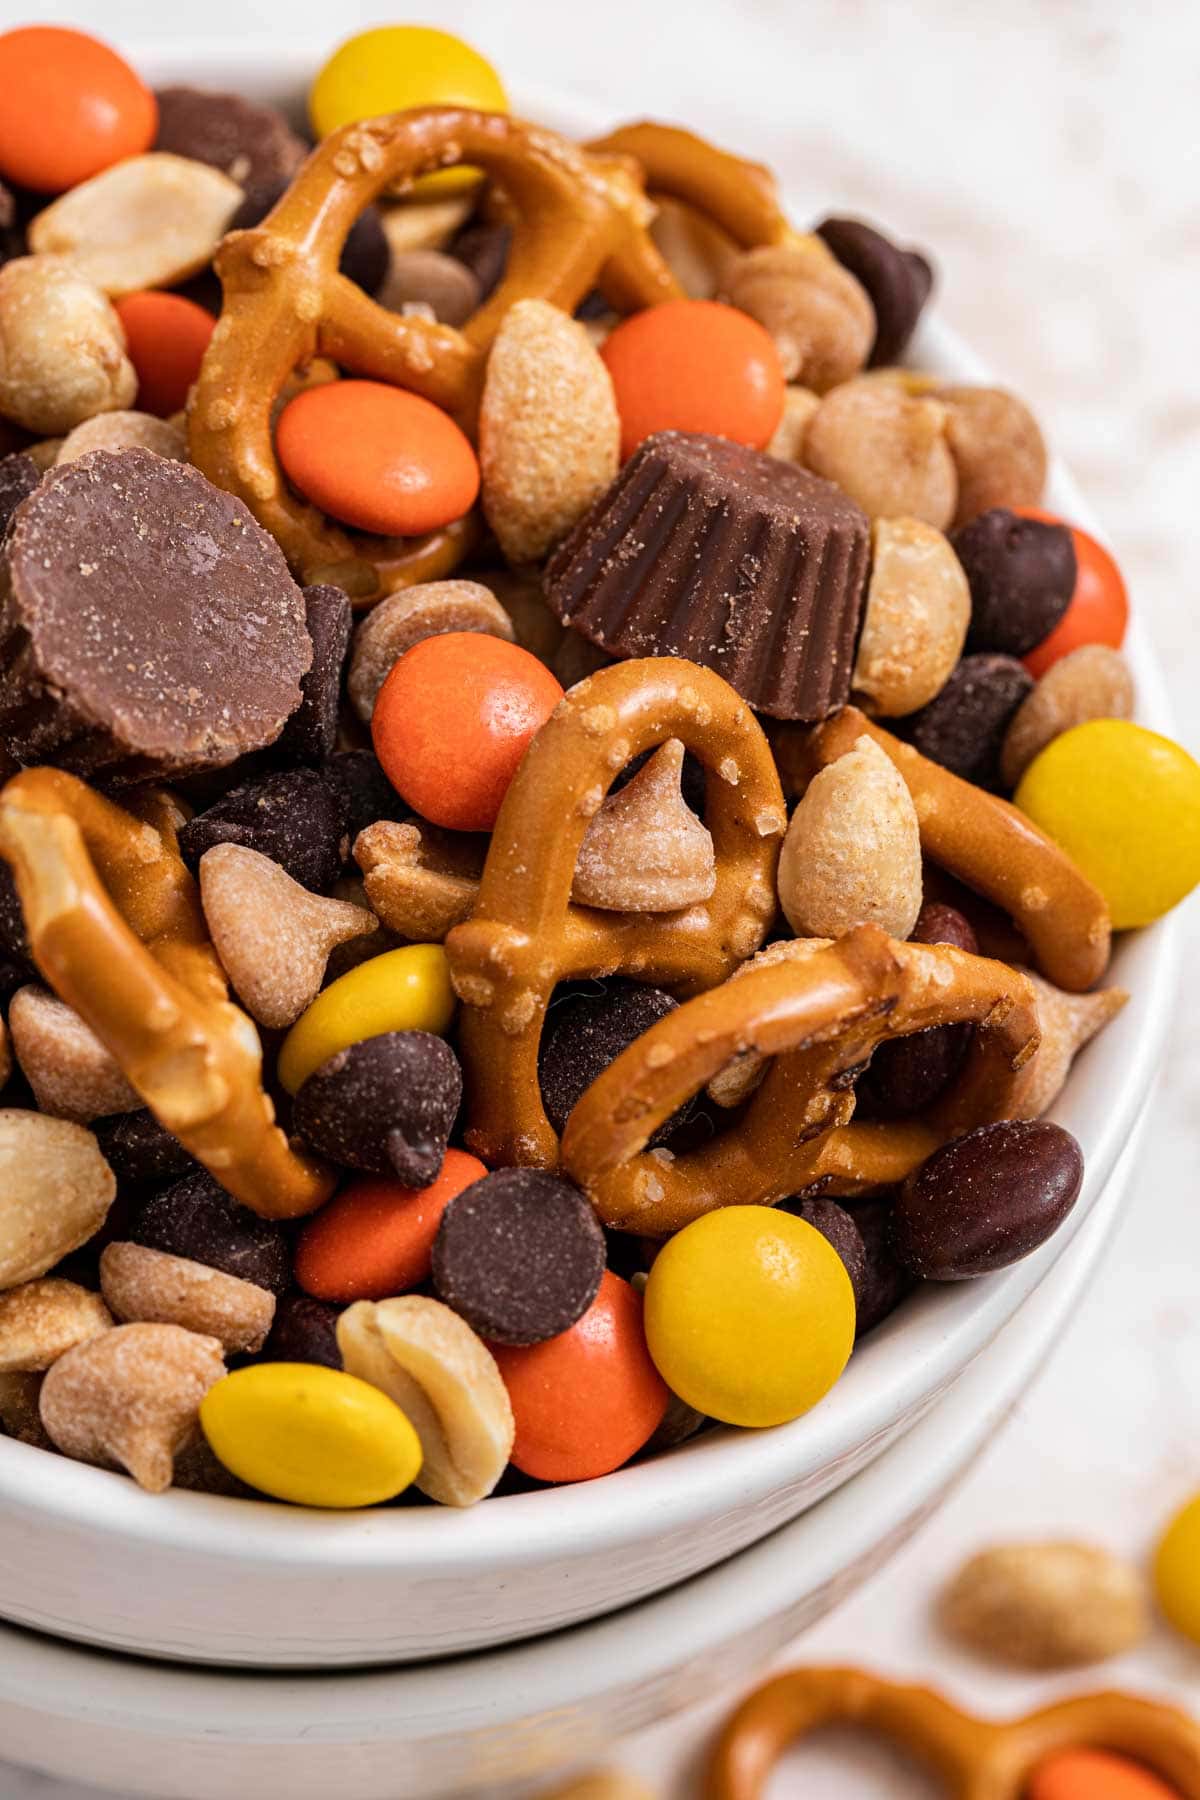 Costco's Bento Box Snack Mix Warning Label Has Fans Divided